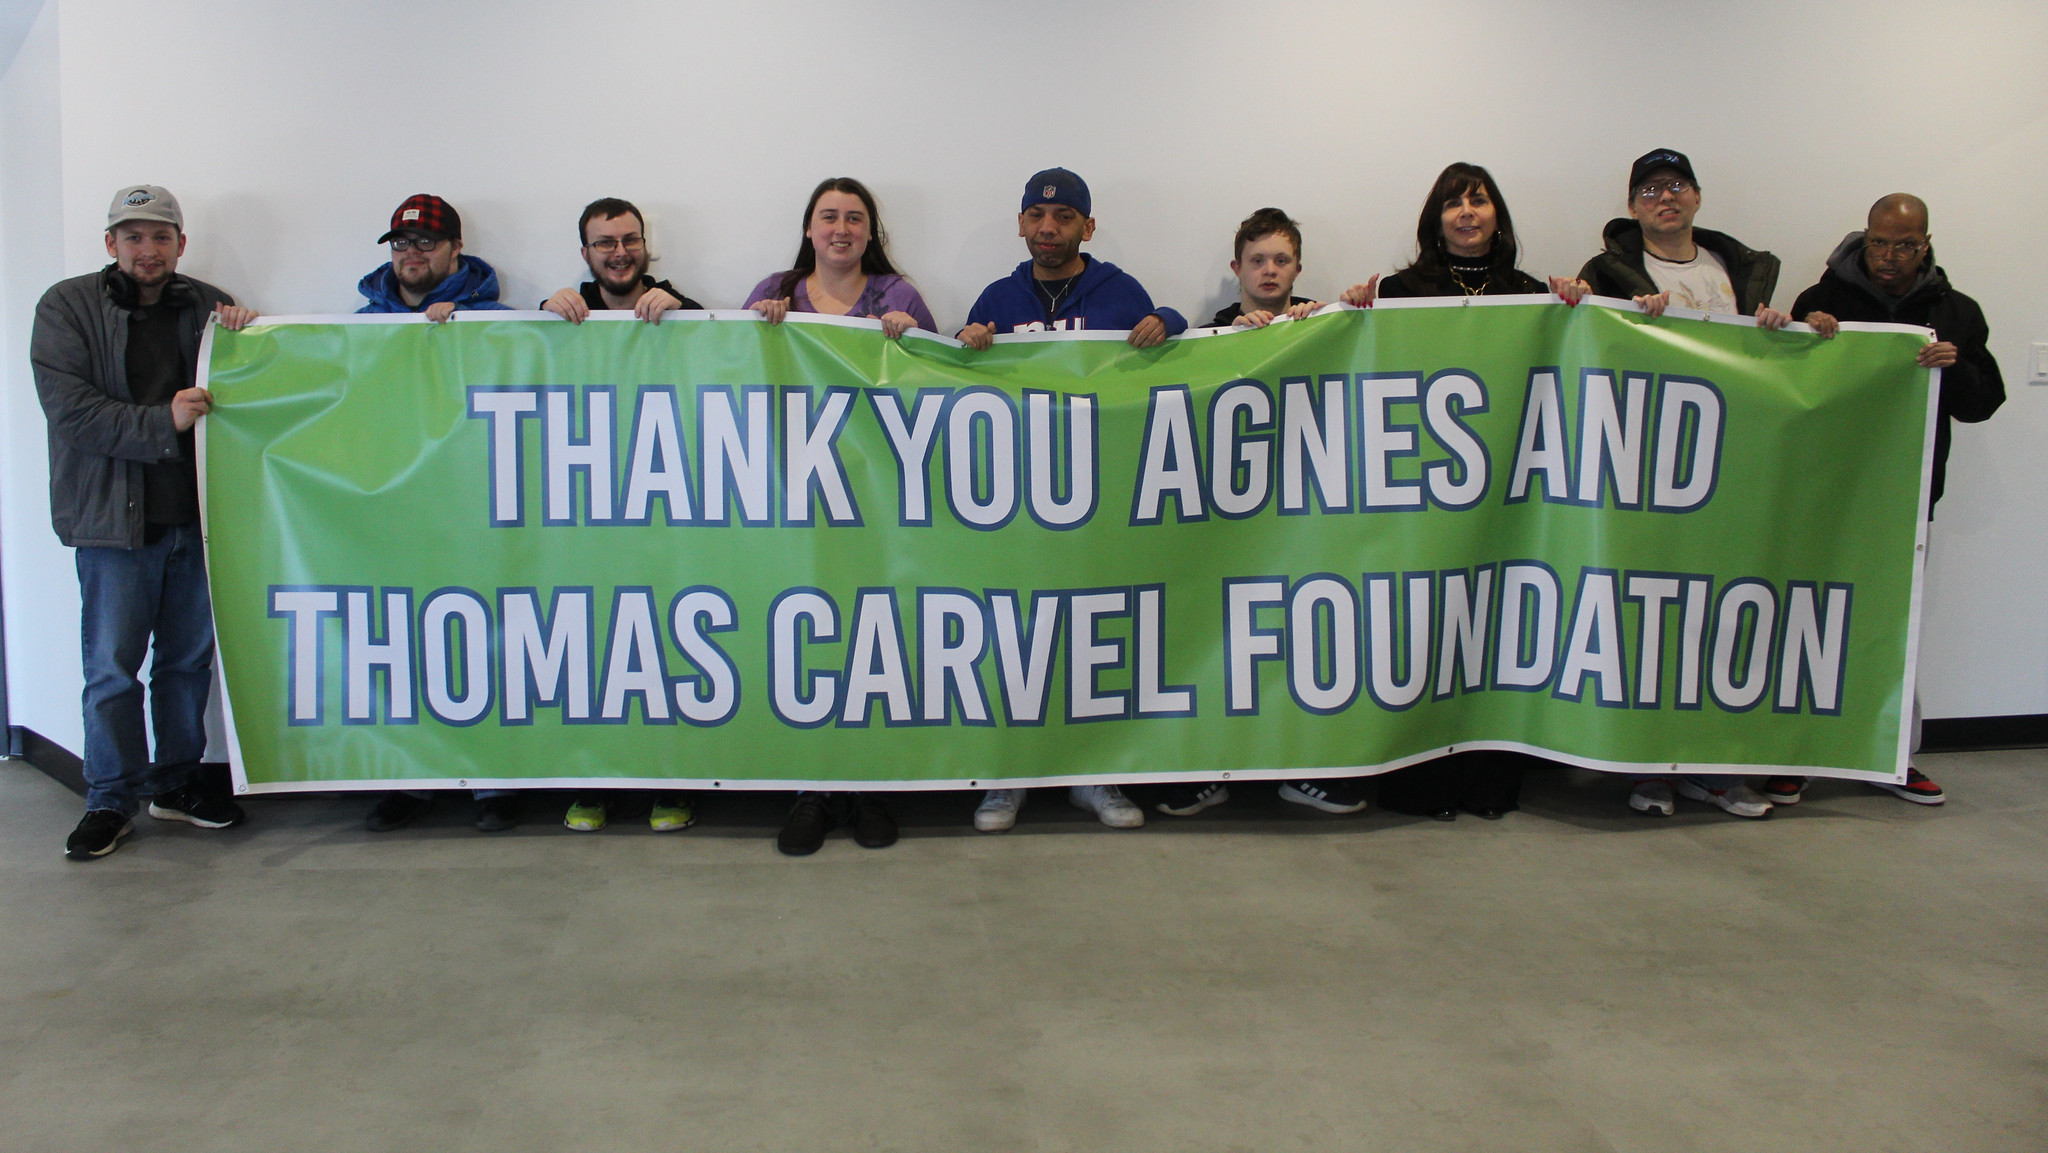 Thank you to the Thomas Carvel Foundation, a major donor to the InterArts Center